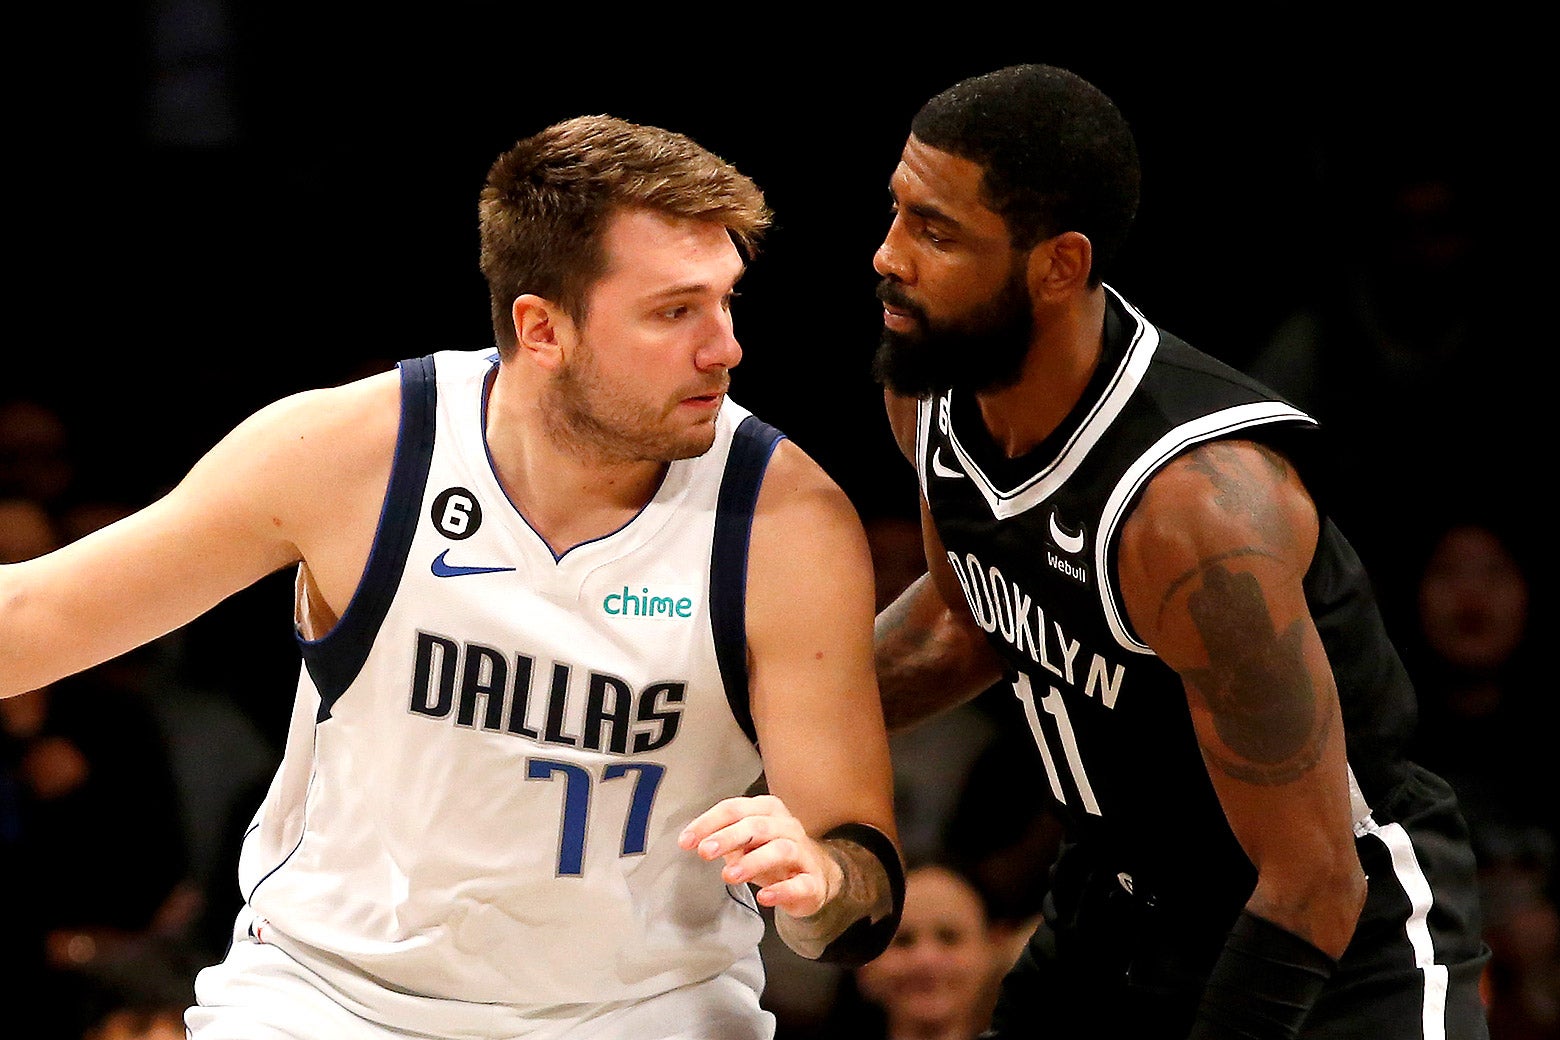 Luka Doncic, in a white Dallas Mavericks jersey, attempts to maneuver around Kyrie Irving, in a black Brooklyn Nets jersey, during a game.